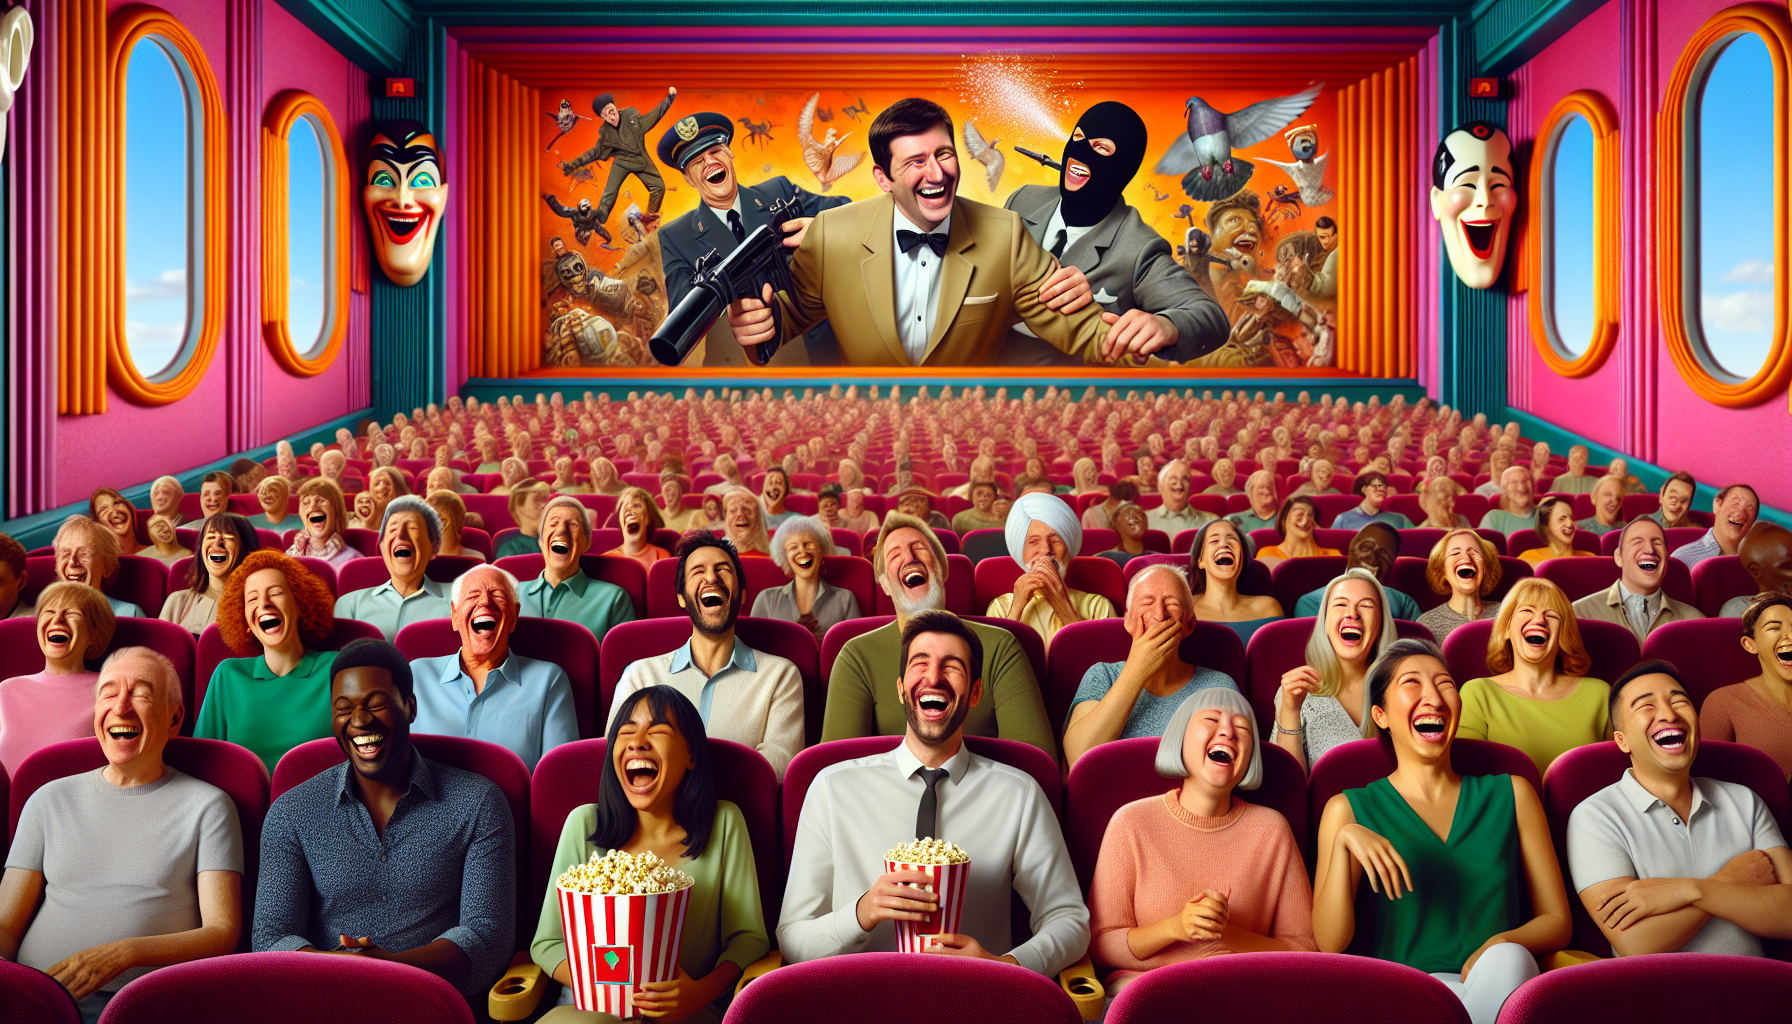 Create a whimsical cinema theater with a diverse audience laughing uproariously; the movie screen displays a scene from a cartoonish spy comedy where the clumsy protagonist unexpectedly saves the day.